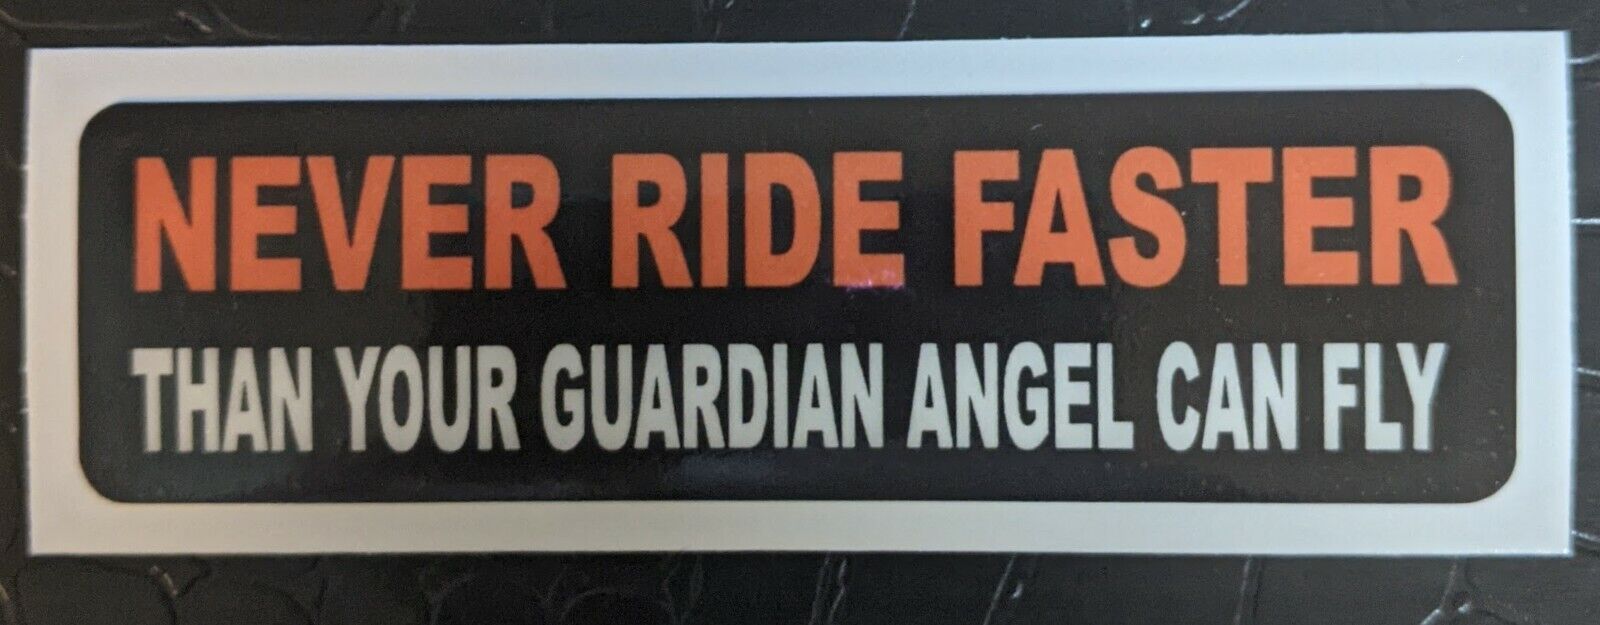 Never Ride Faster Than Your Angel Can Fly Motorcycle Helmet Sticker Helmet Decal